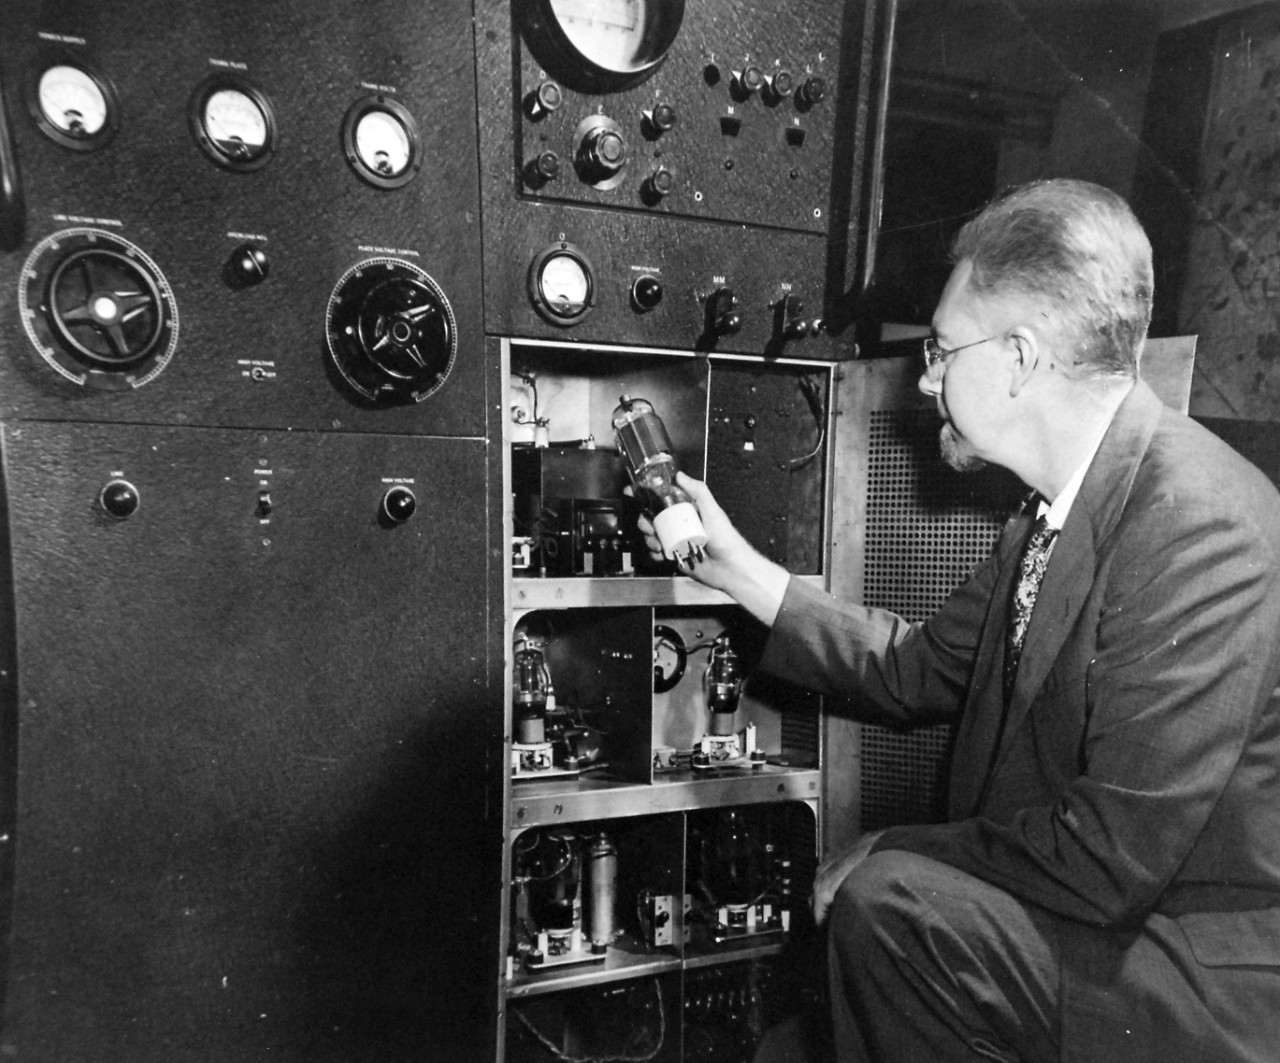 80-G-700312:  XAF Radar Receiver, 1930s.    Dr. Robert M. Page, pioneer in radar, examines one of the elemental radio tubes in the first radio set at Naval Research Laboratory in Anacostia, Washington, D.C.  Photograph released August 14, 1945.  U.S. Navy photograph, now in the collections of the National Archives.